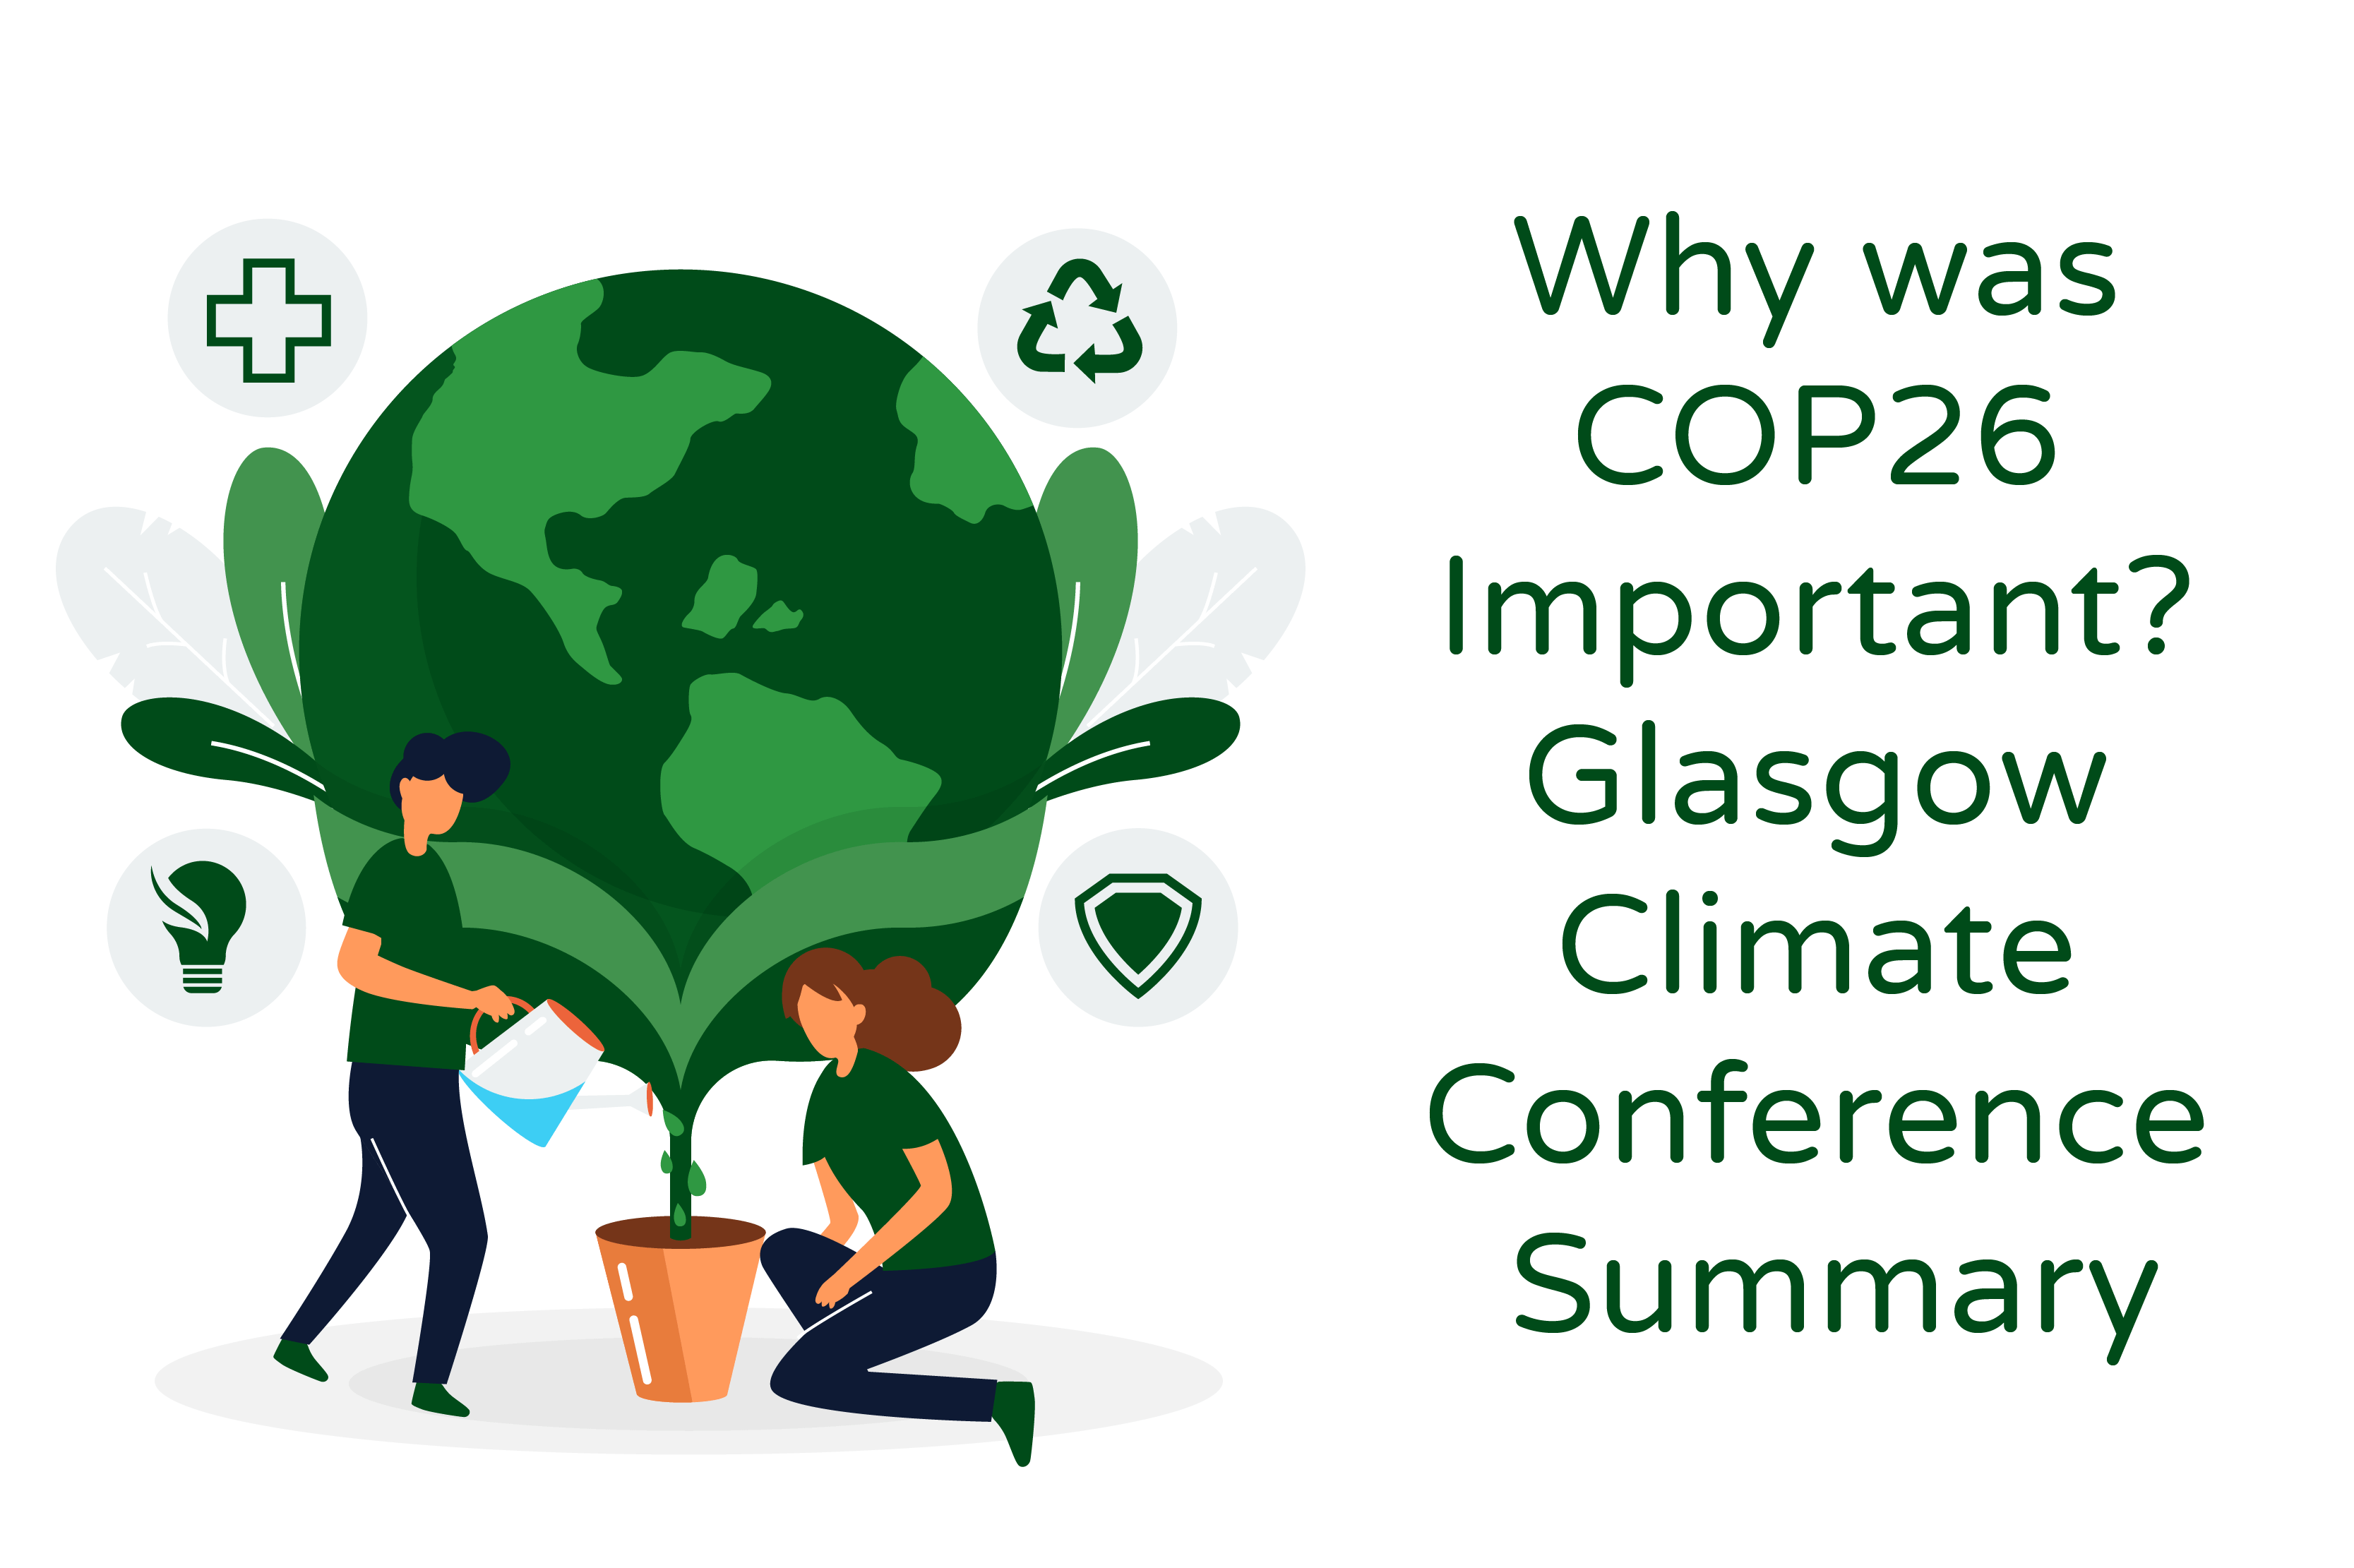 Illustration titled 'Why was COP26 Important? Glasgow Climate Conference Summary.' The illustration depicts a pot from which the globe is emerging, symbolizing the Earth and sustainability. Two people are depicted, with one person watering the pot, representing the nurturing and care required for a sustainable future. The illustration represents the United Nations Glasgow Climate Change Conference and highlights the significance of COP26 in addressing global climate challenges and promoting sustainability.